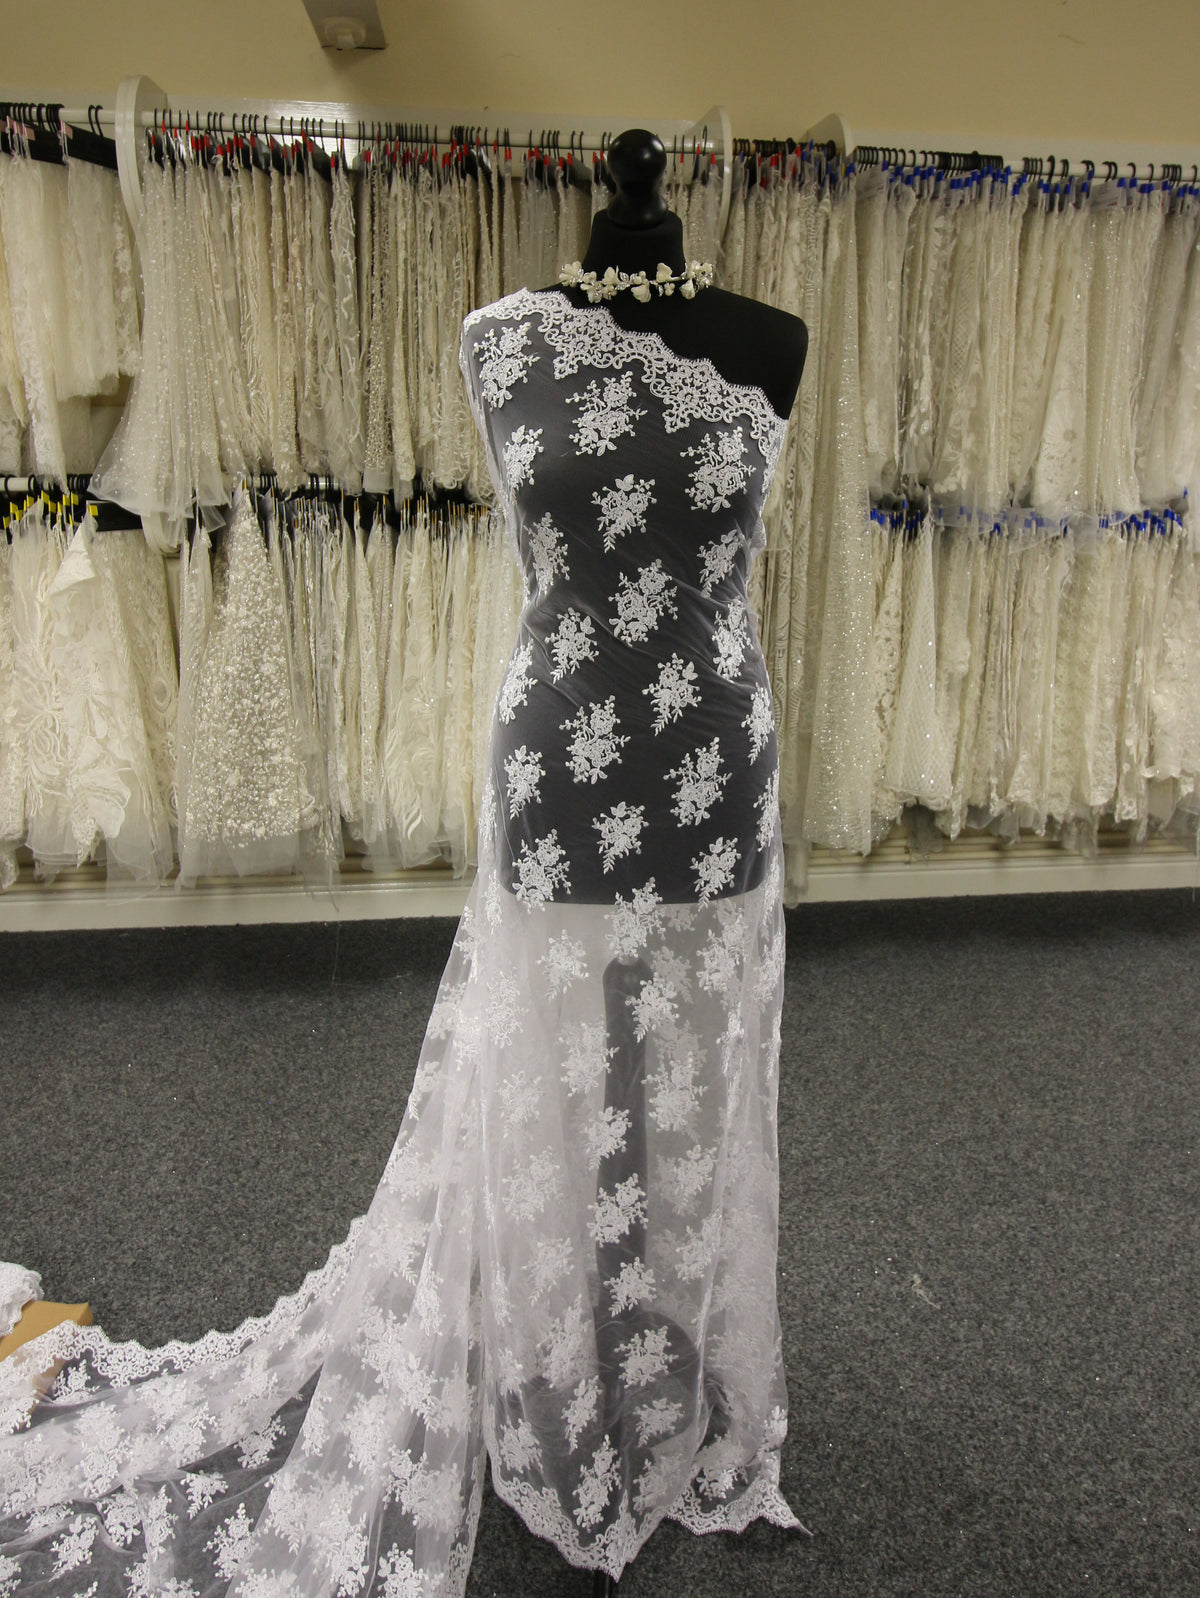 White Corded Lace - Janis